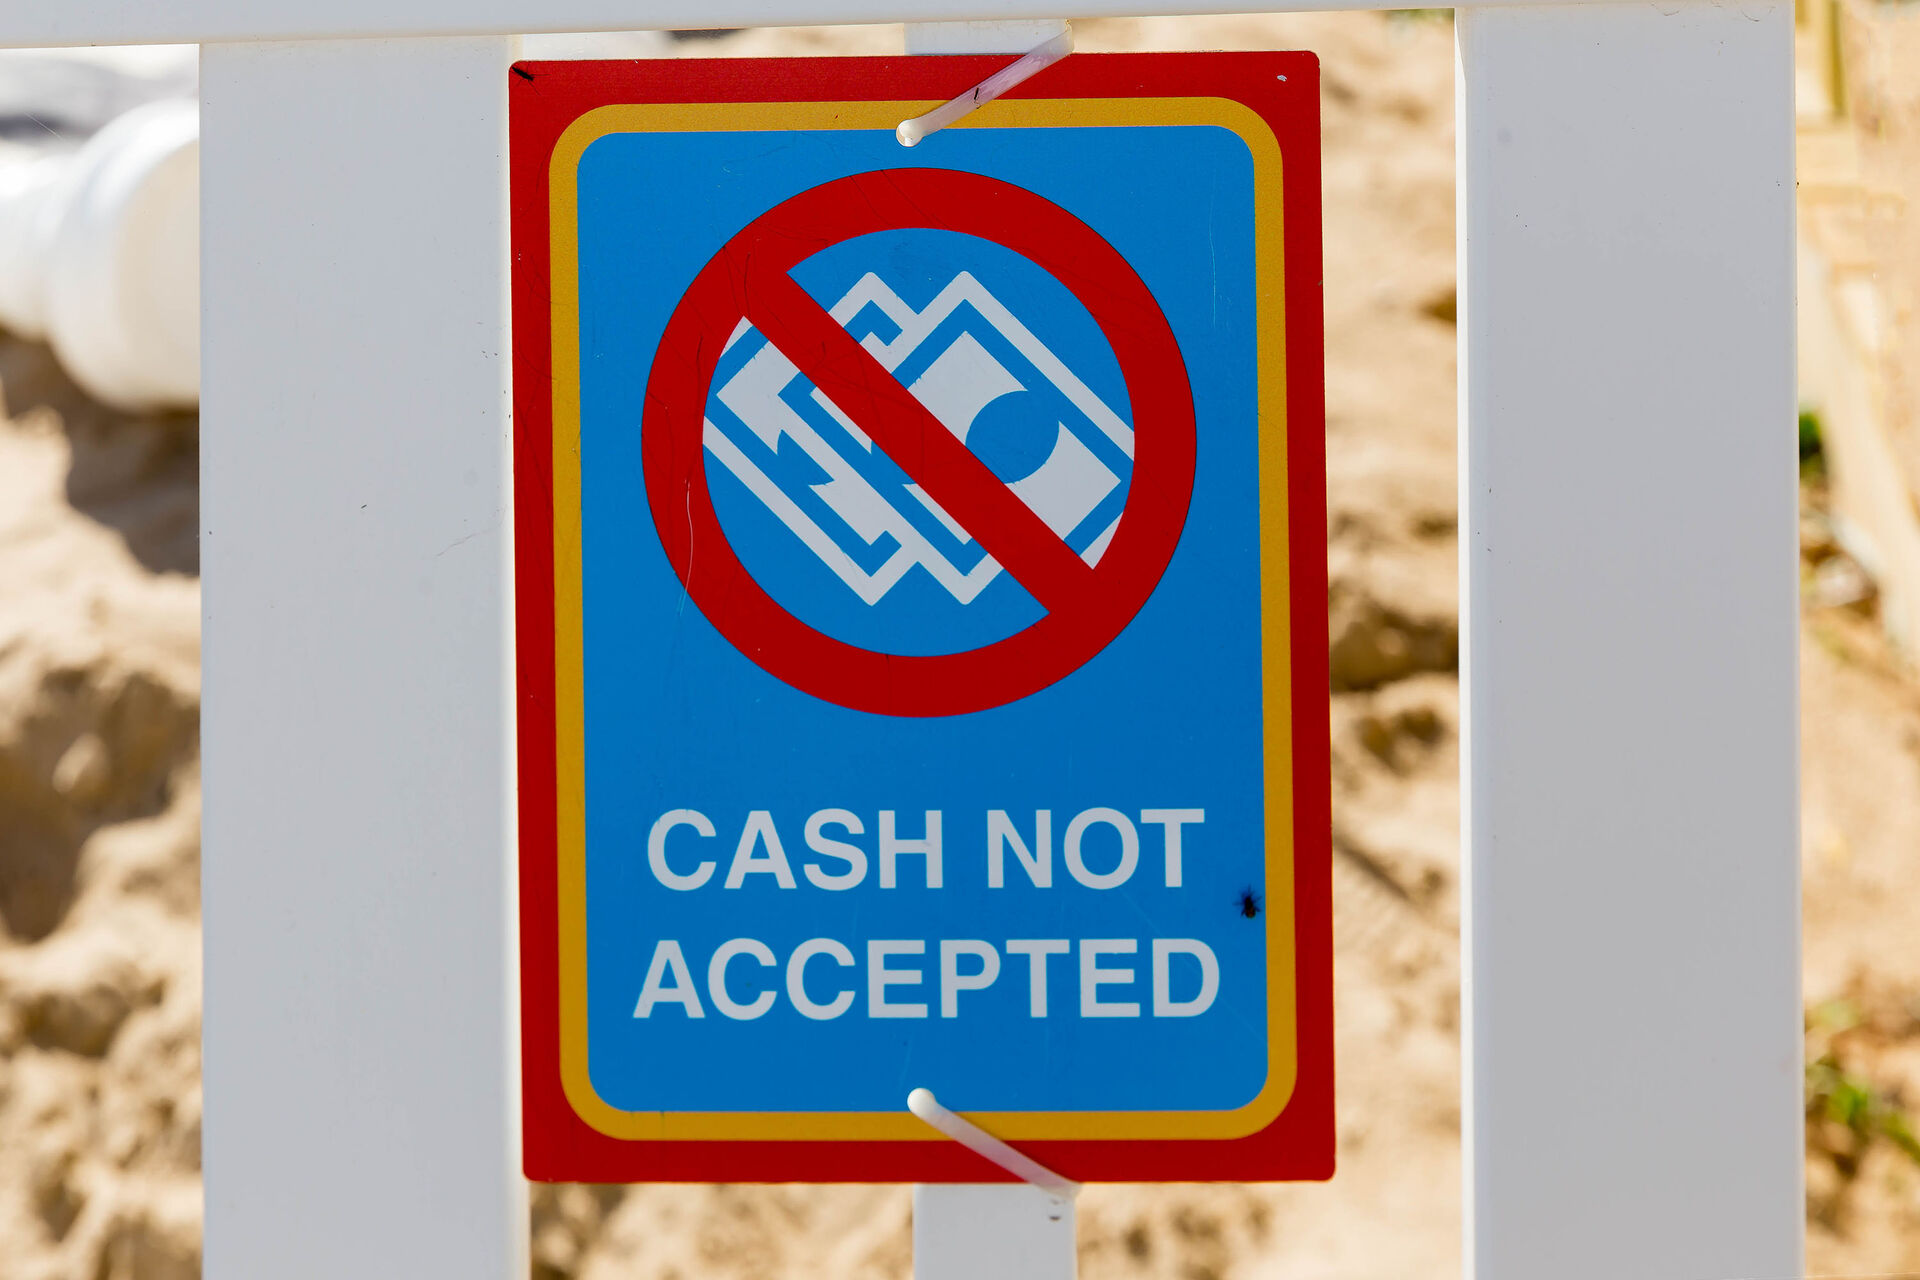 Cash not accepted